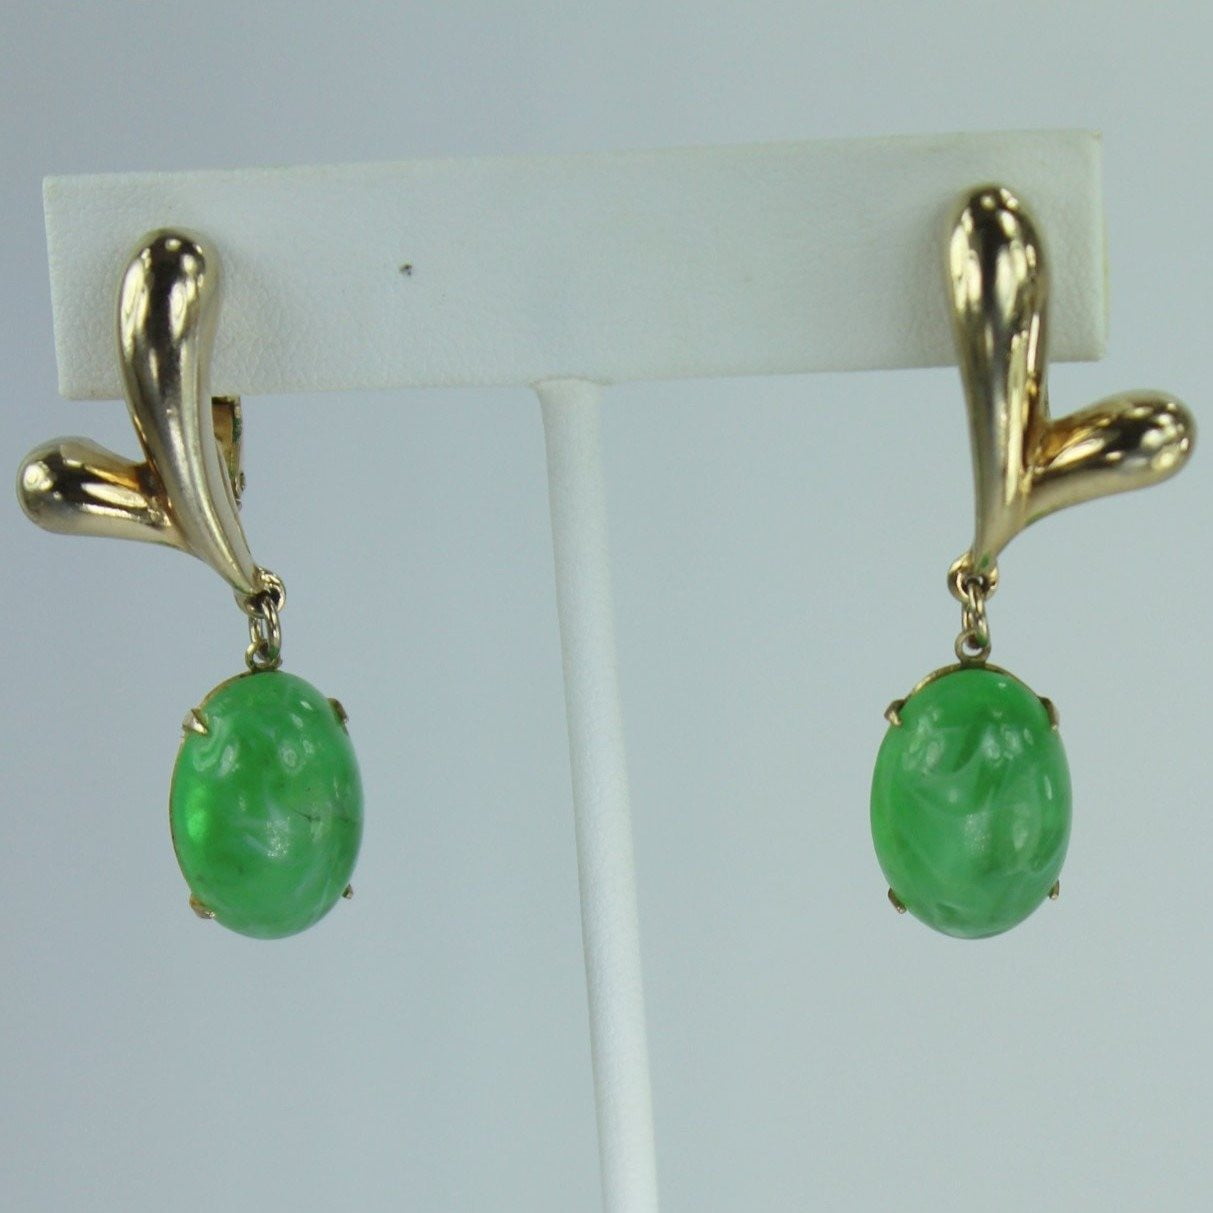 Jadeite Clip Earrings Gold Tone Dangle Large Oval Stone drop style